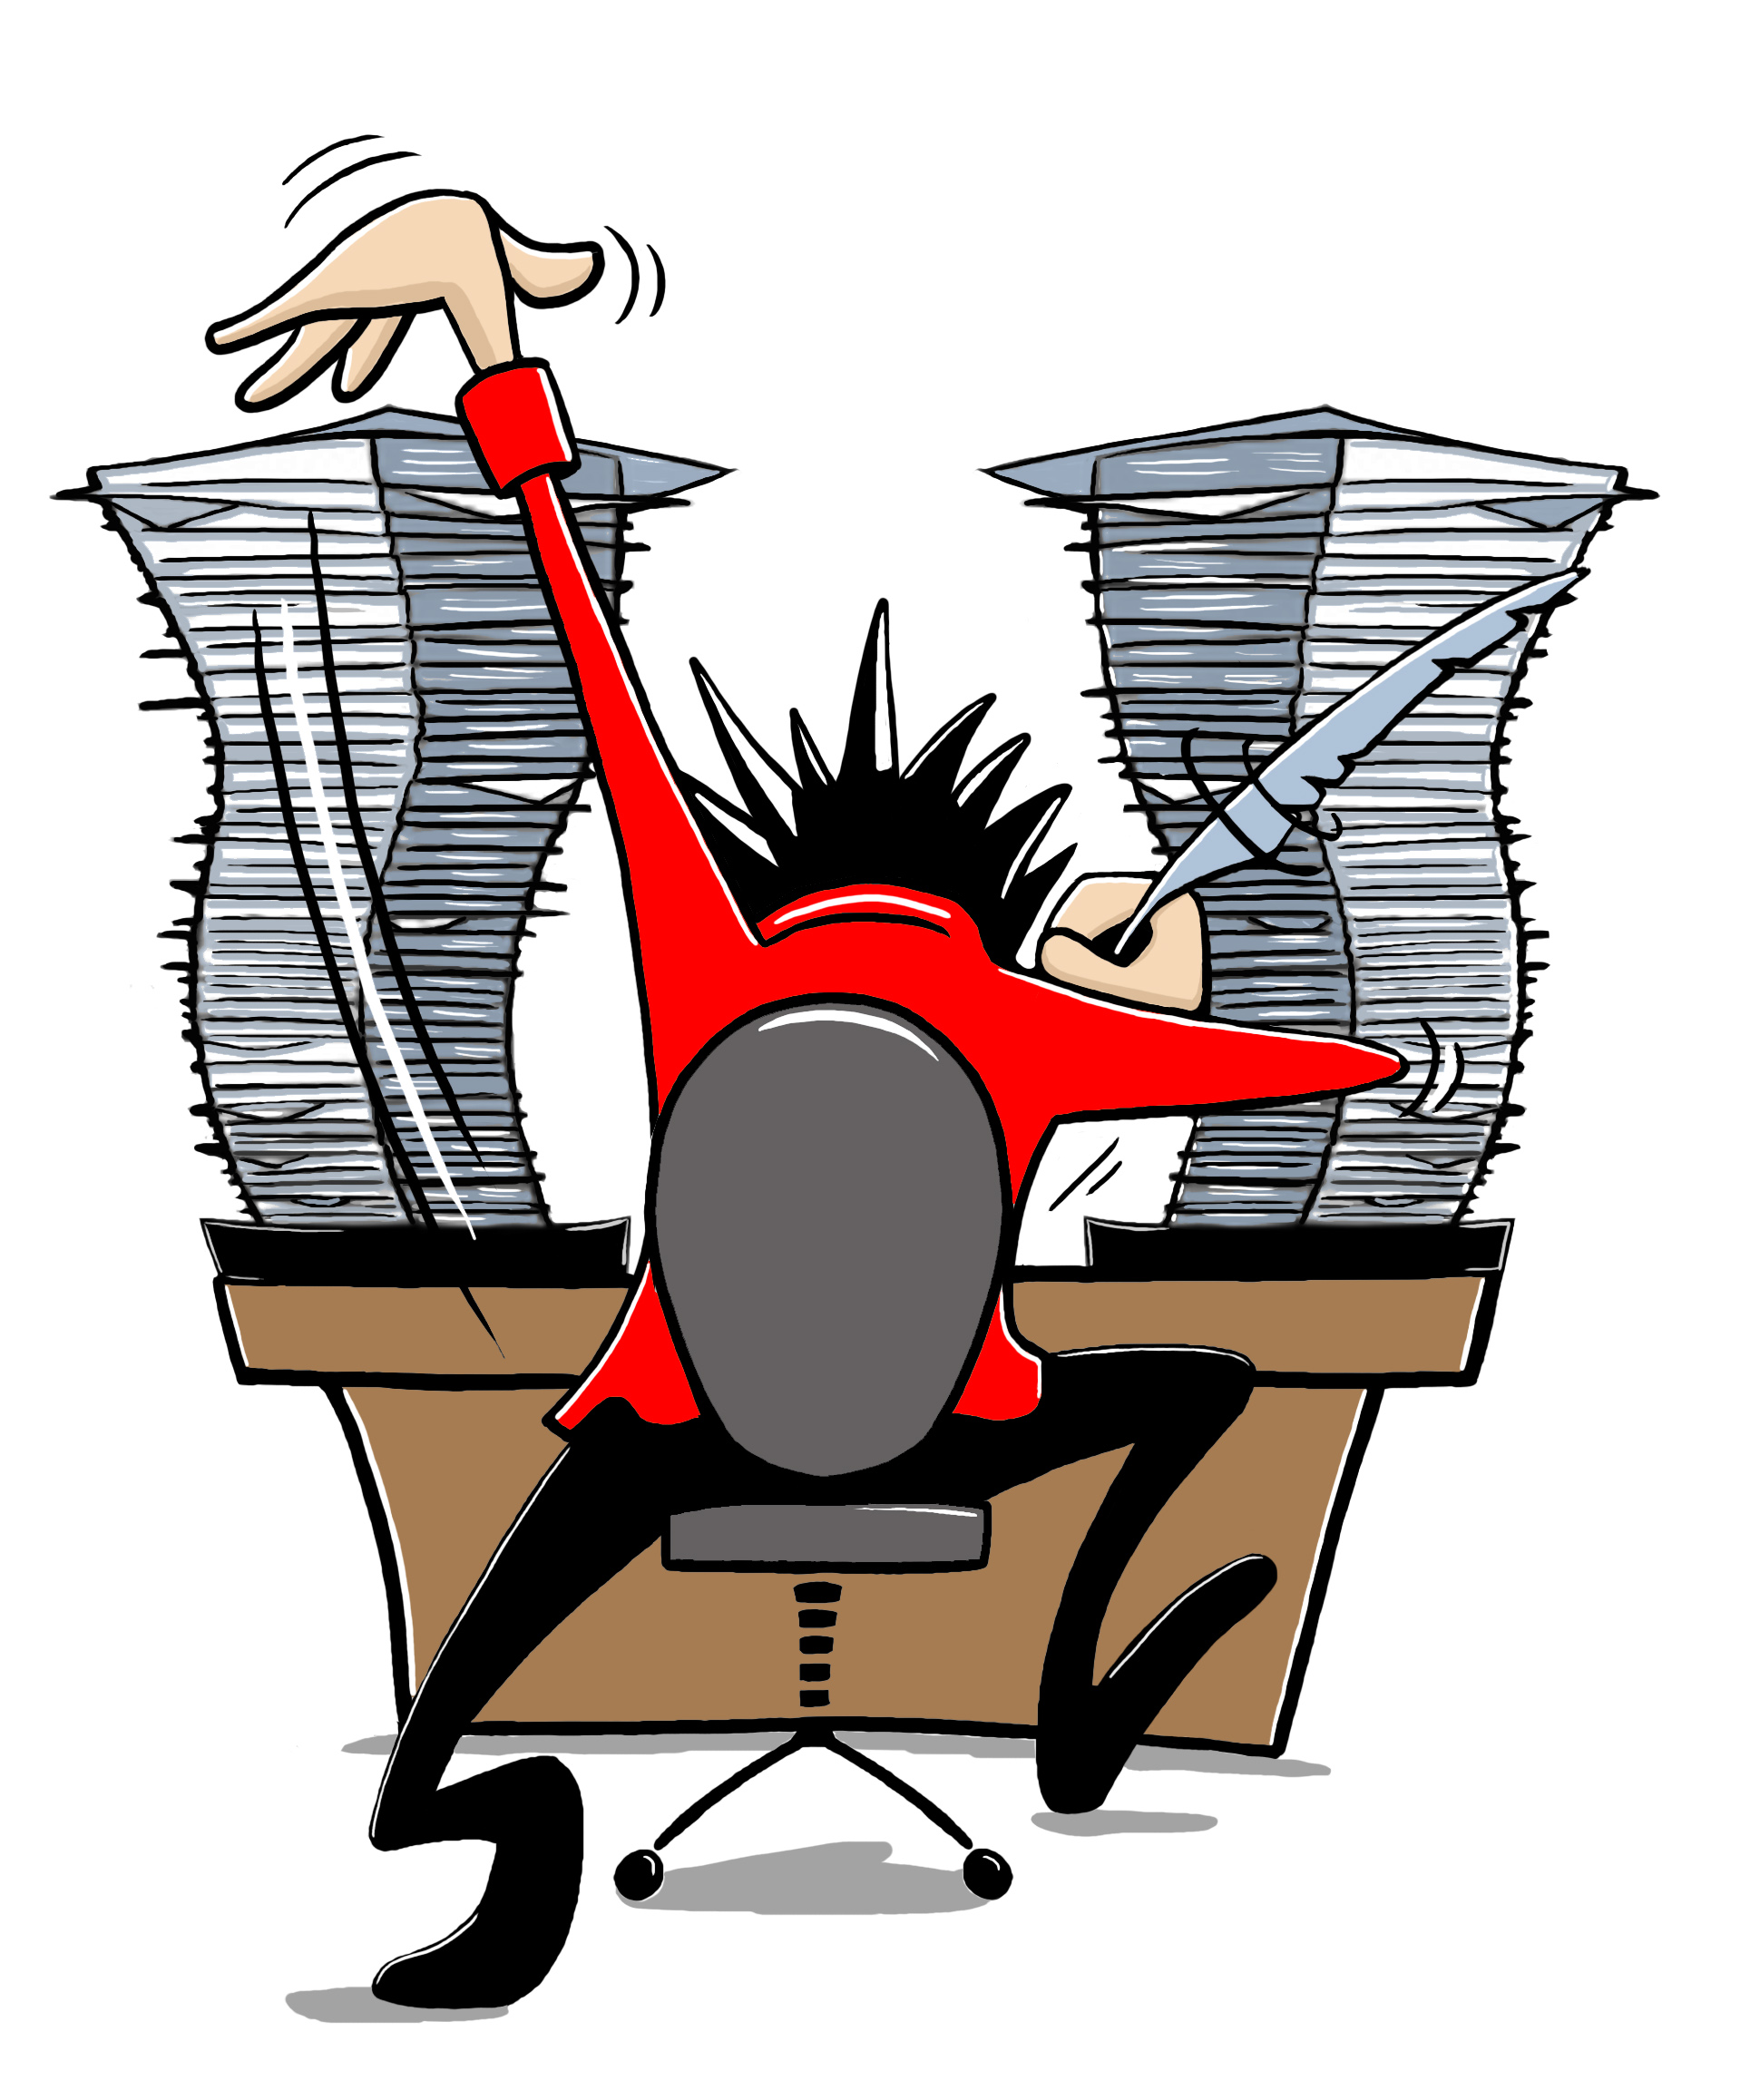 Image result for writing working hard cartoon